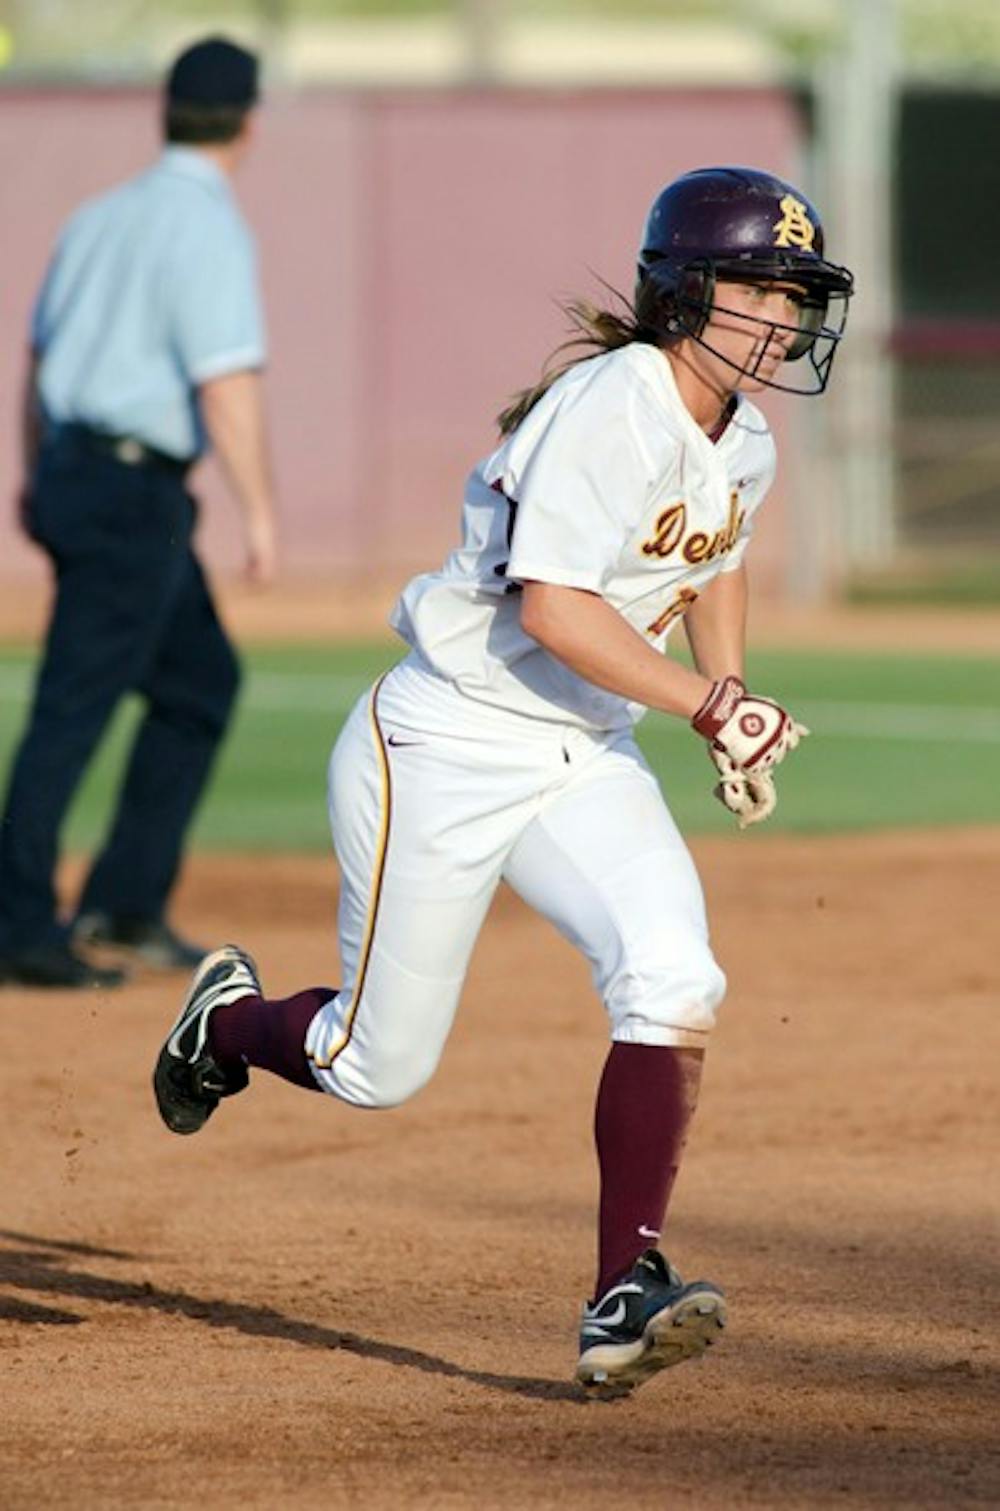 Katelyn Boyd rounds second base against North Dakota State during the NCAA Regionals on May 20, 2011. Boyd is one of four returning starters as ASU looks to defend its national title. (Photo by Aaron Lavinsky)